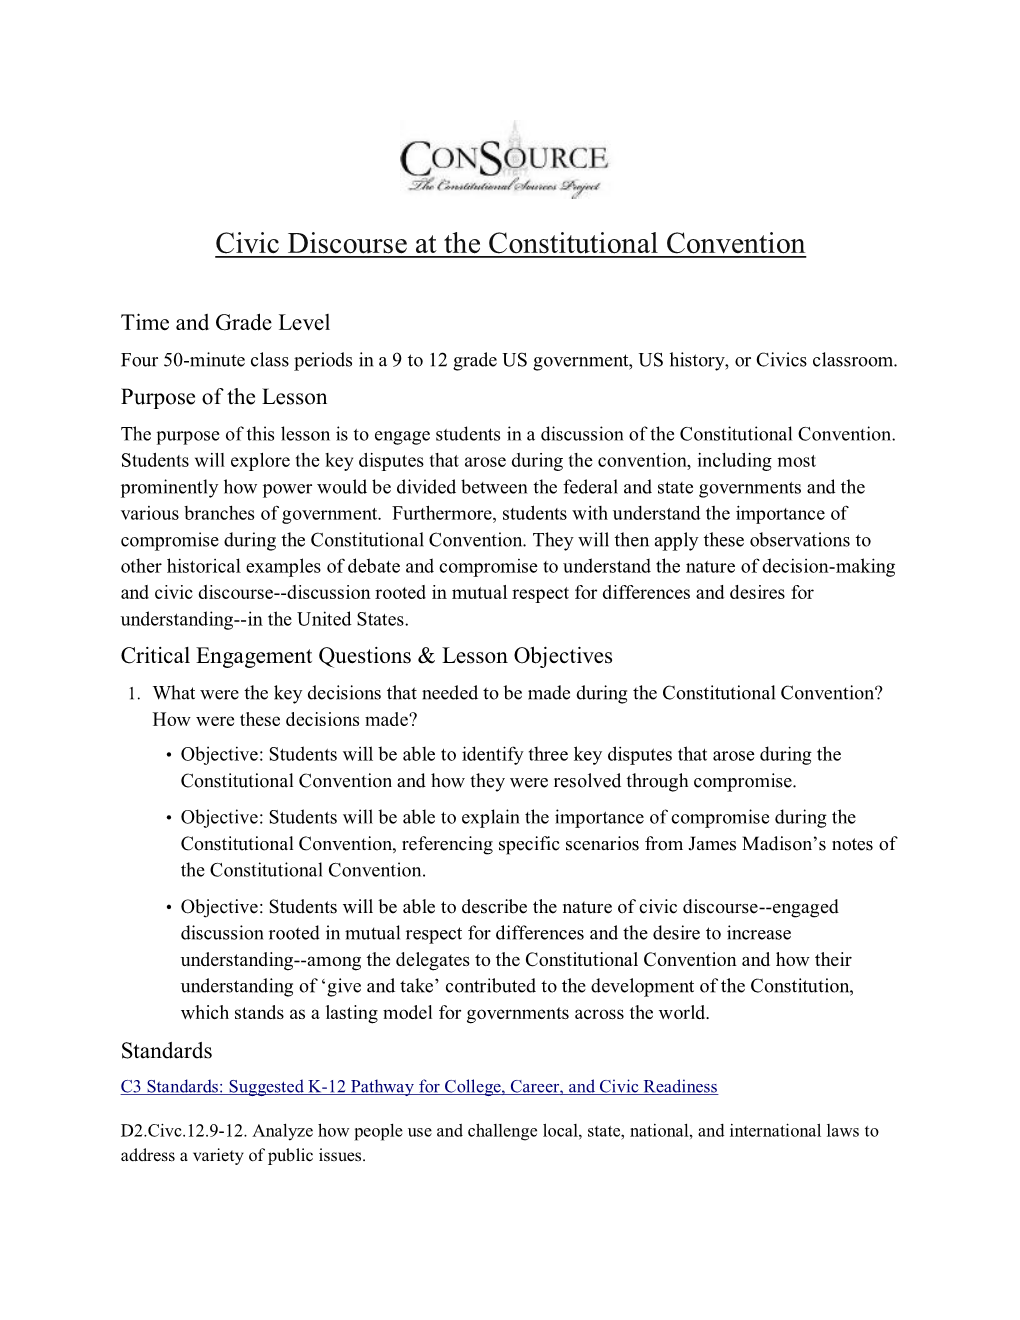 Civic Discourse at the Constitutional Convention (Grades 9-12)